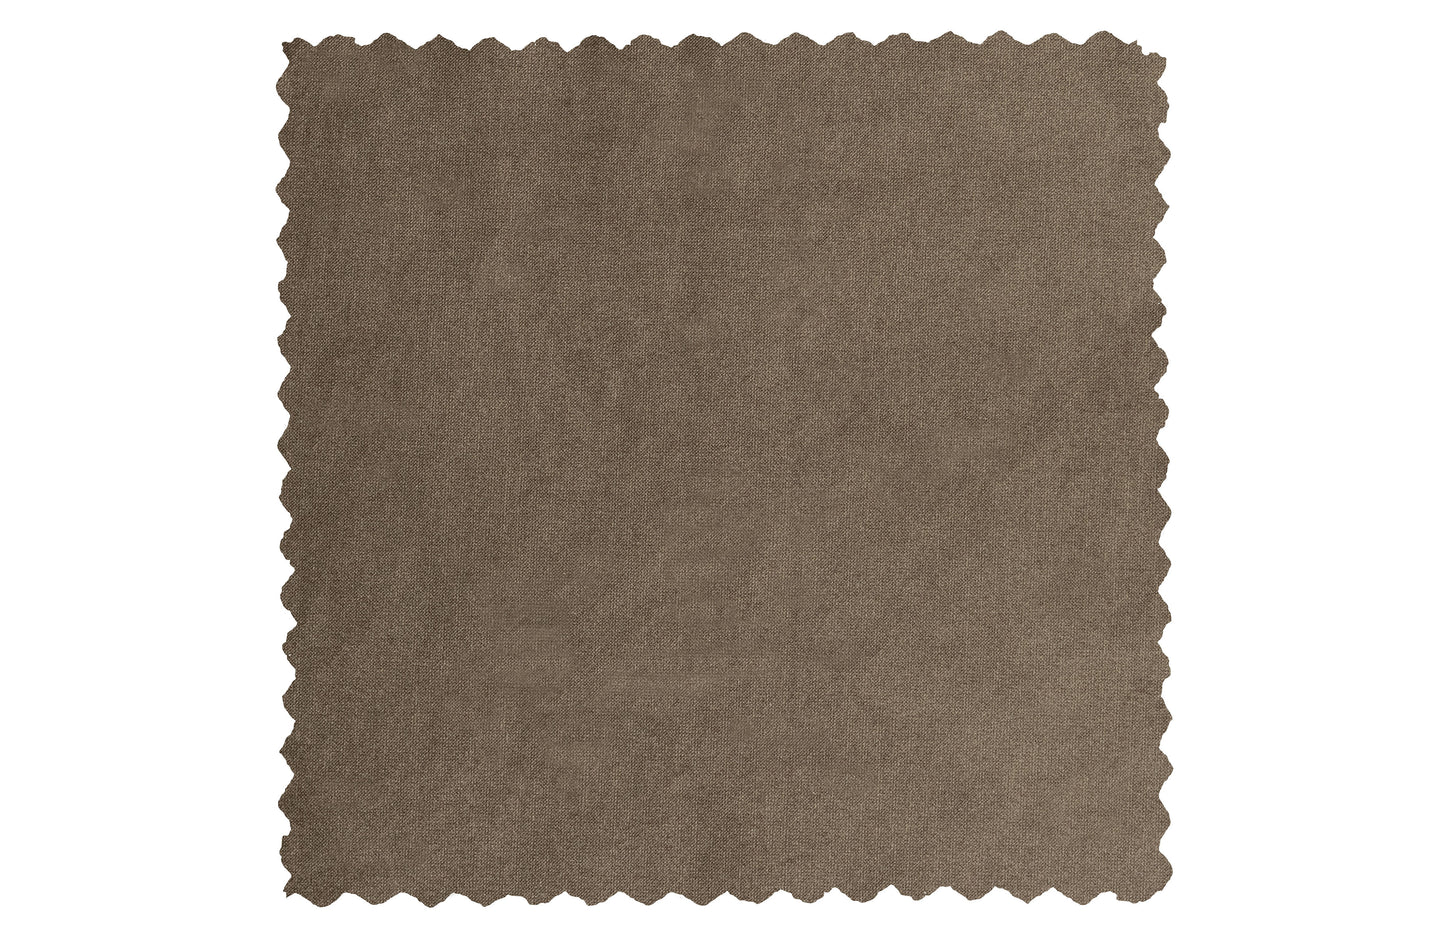 BEPUREHOME | Statement Sessel Velour Taupe